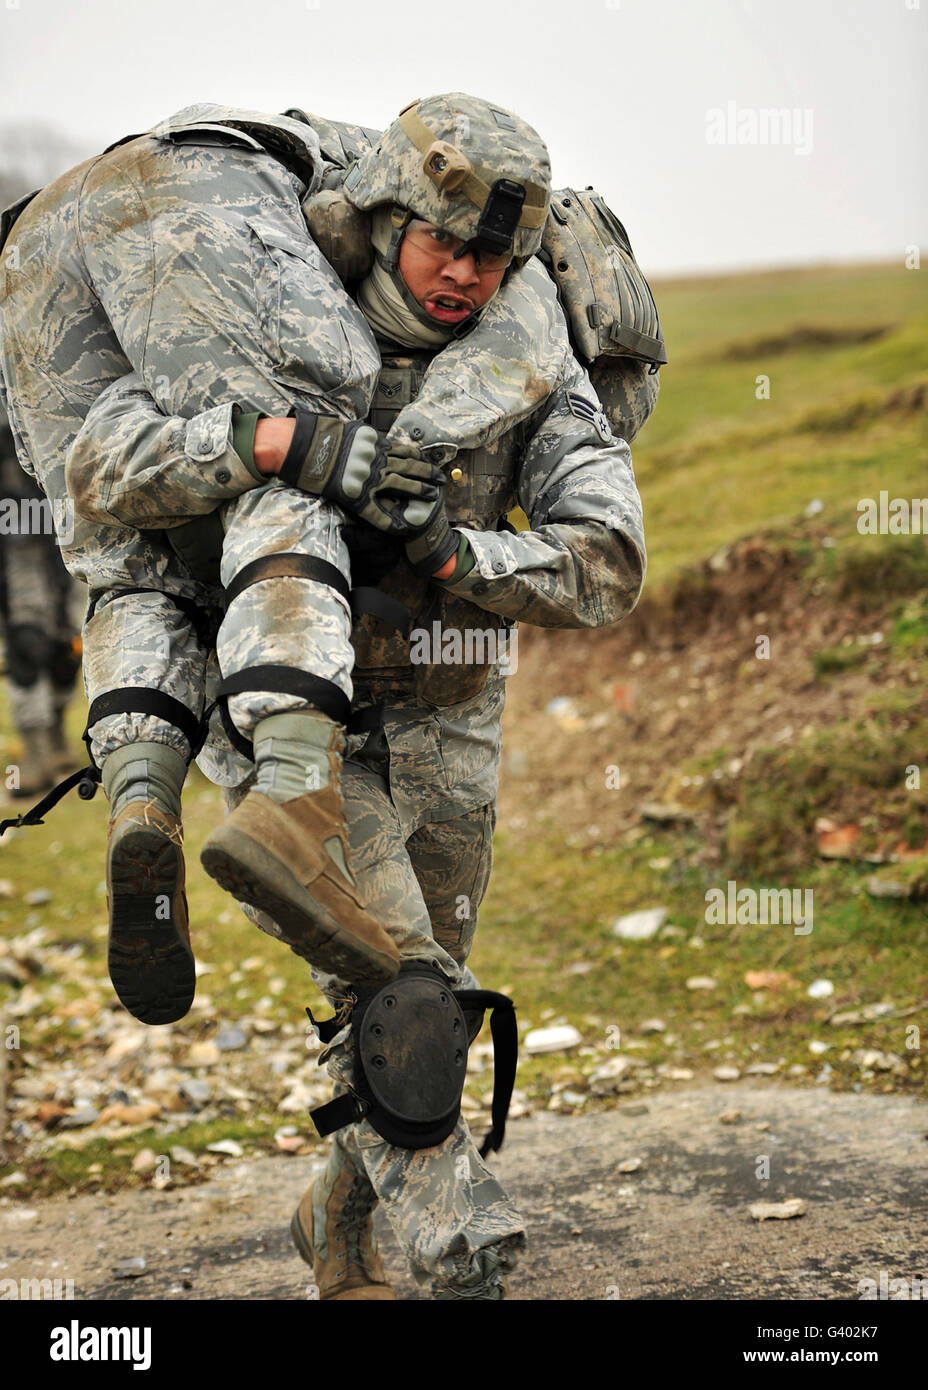 A soldier transports a fellow wounded soldier using the firemanâ€™s carry technique. Stock Photo